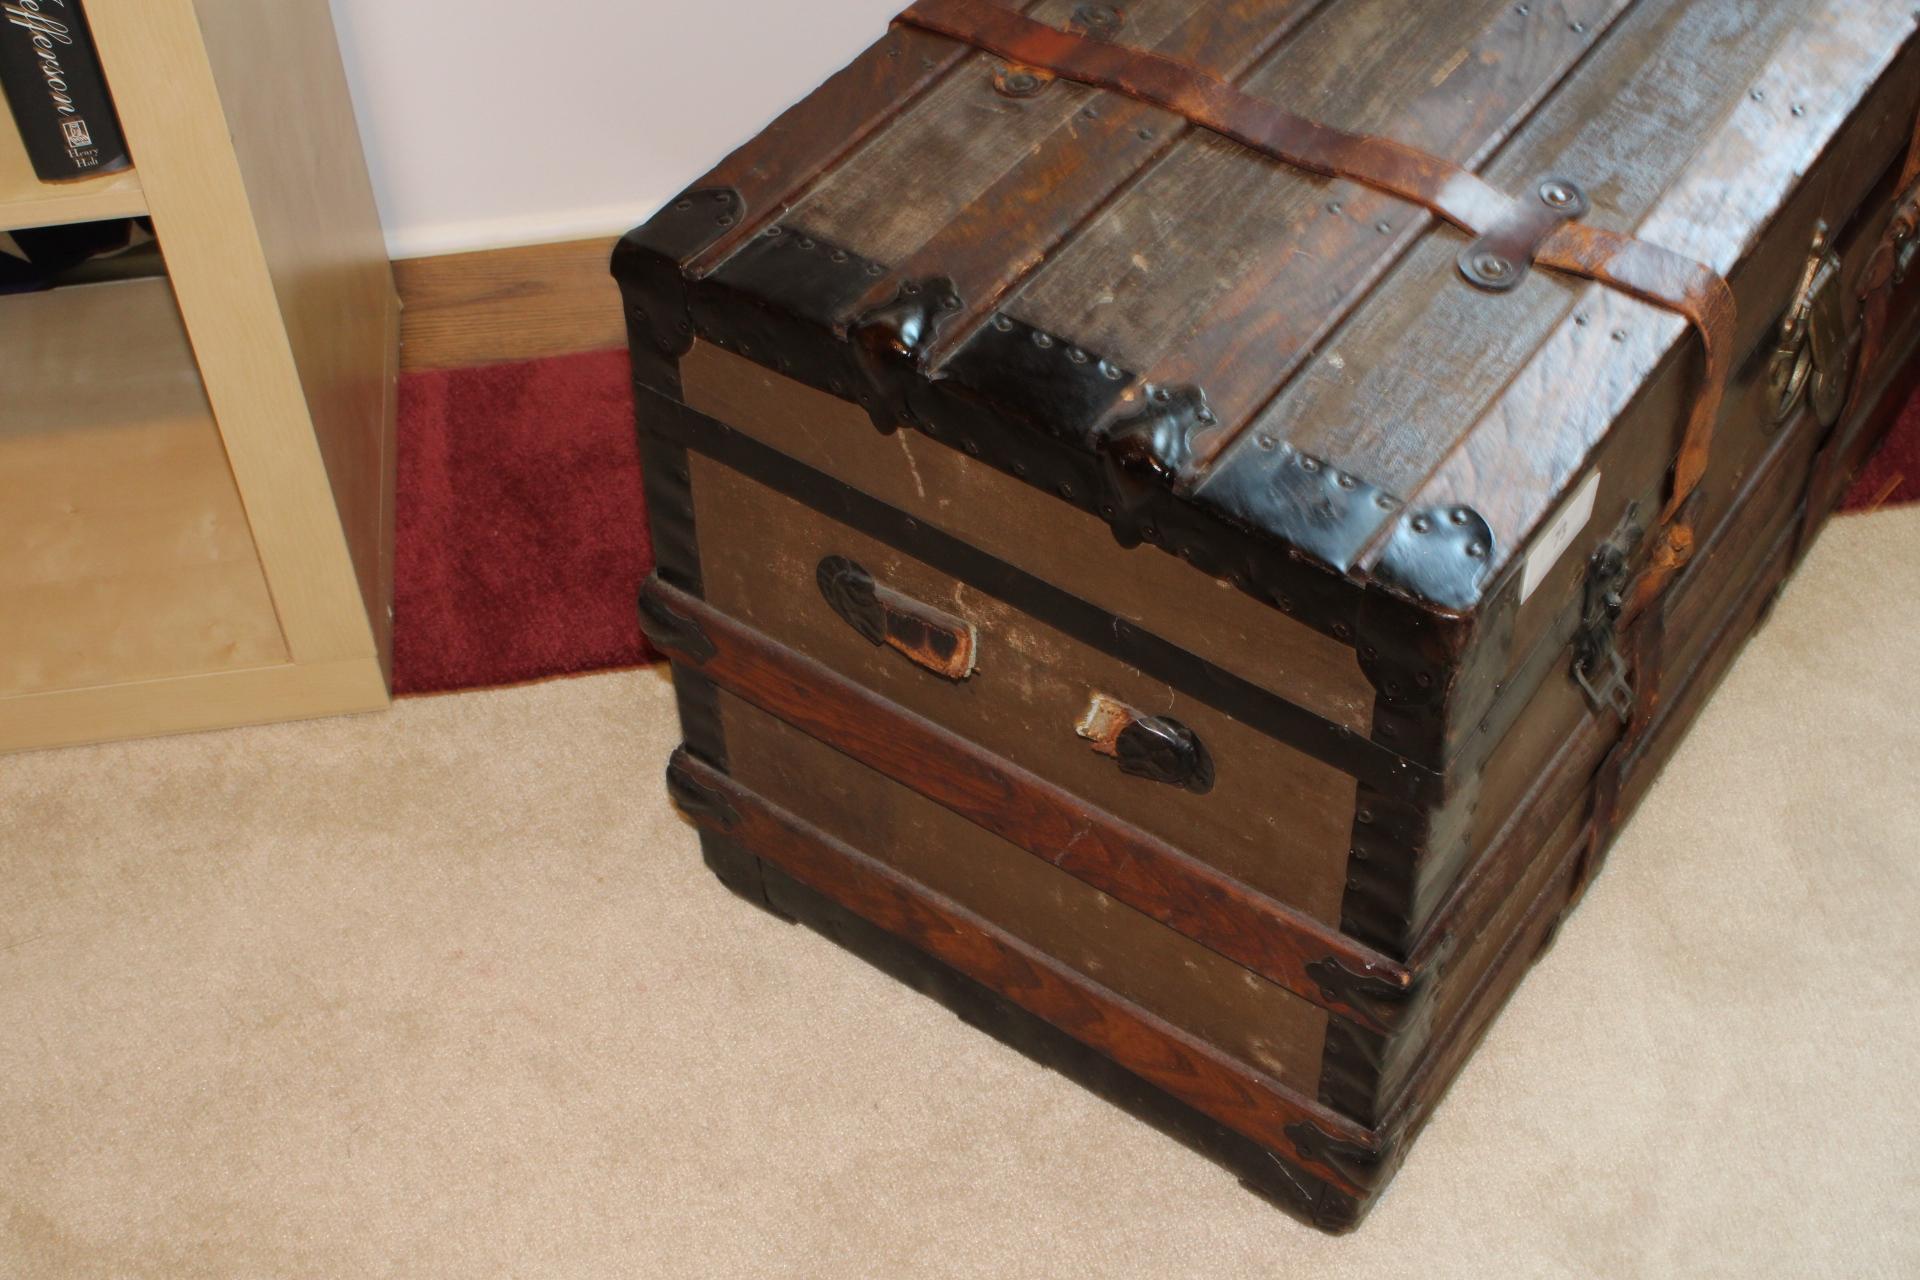 Vintage Yale and Towne Manufacturing Co., Wooden Chest with leather straps. Includes insert organize